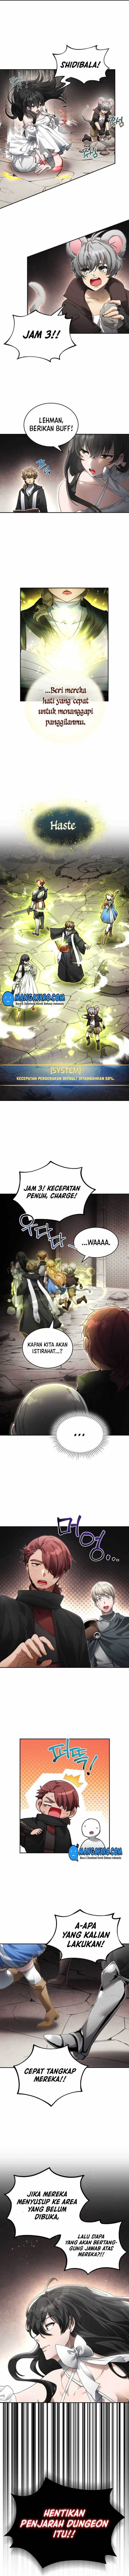 Baca How to Live at the Max Level Chapter 6  - GudangKomik